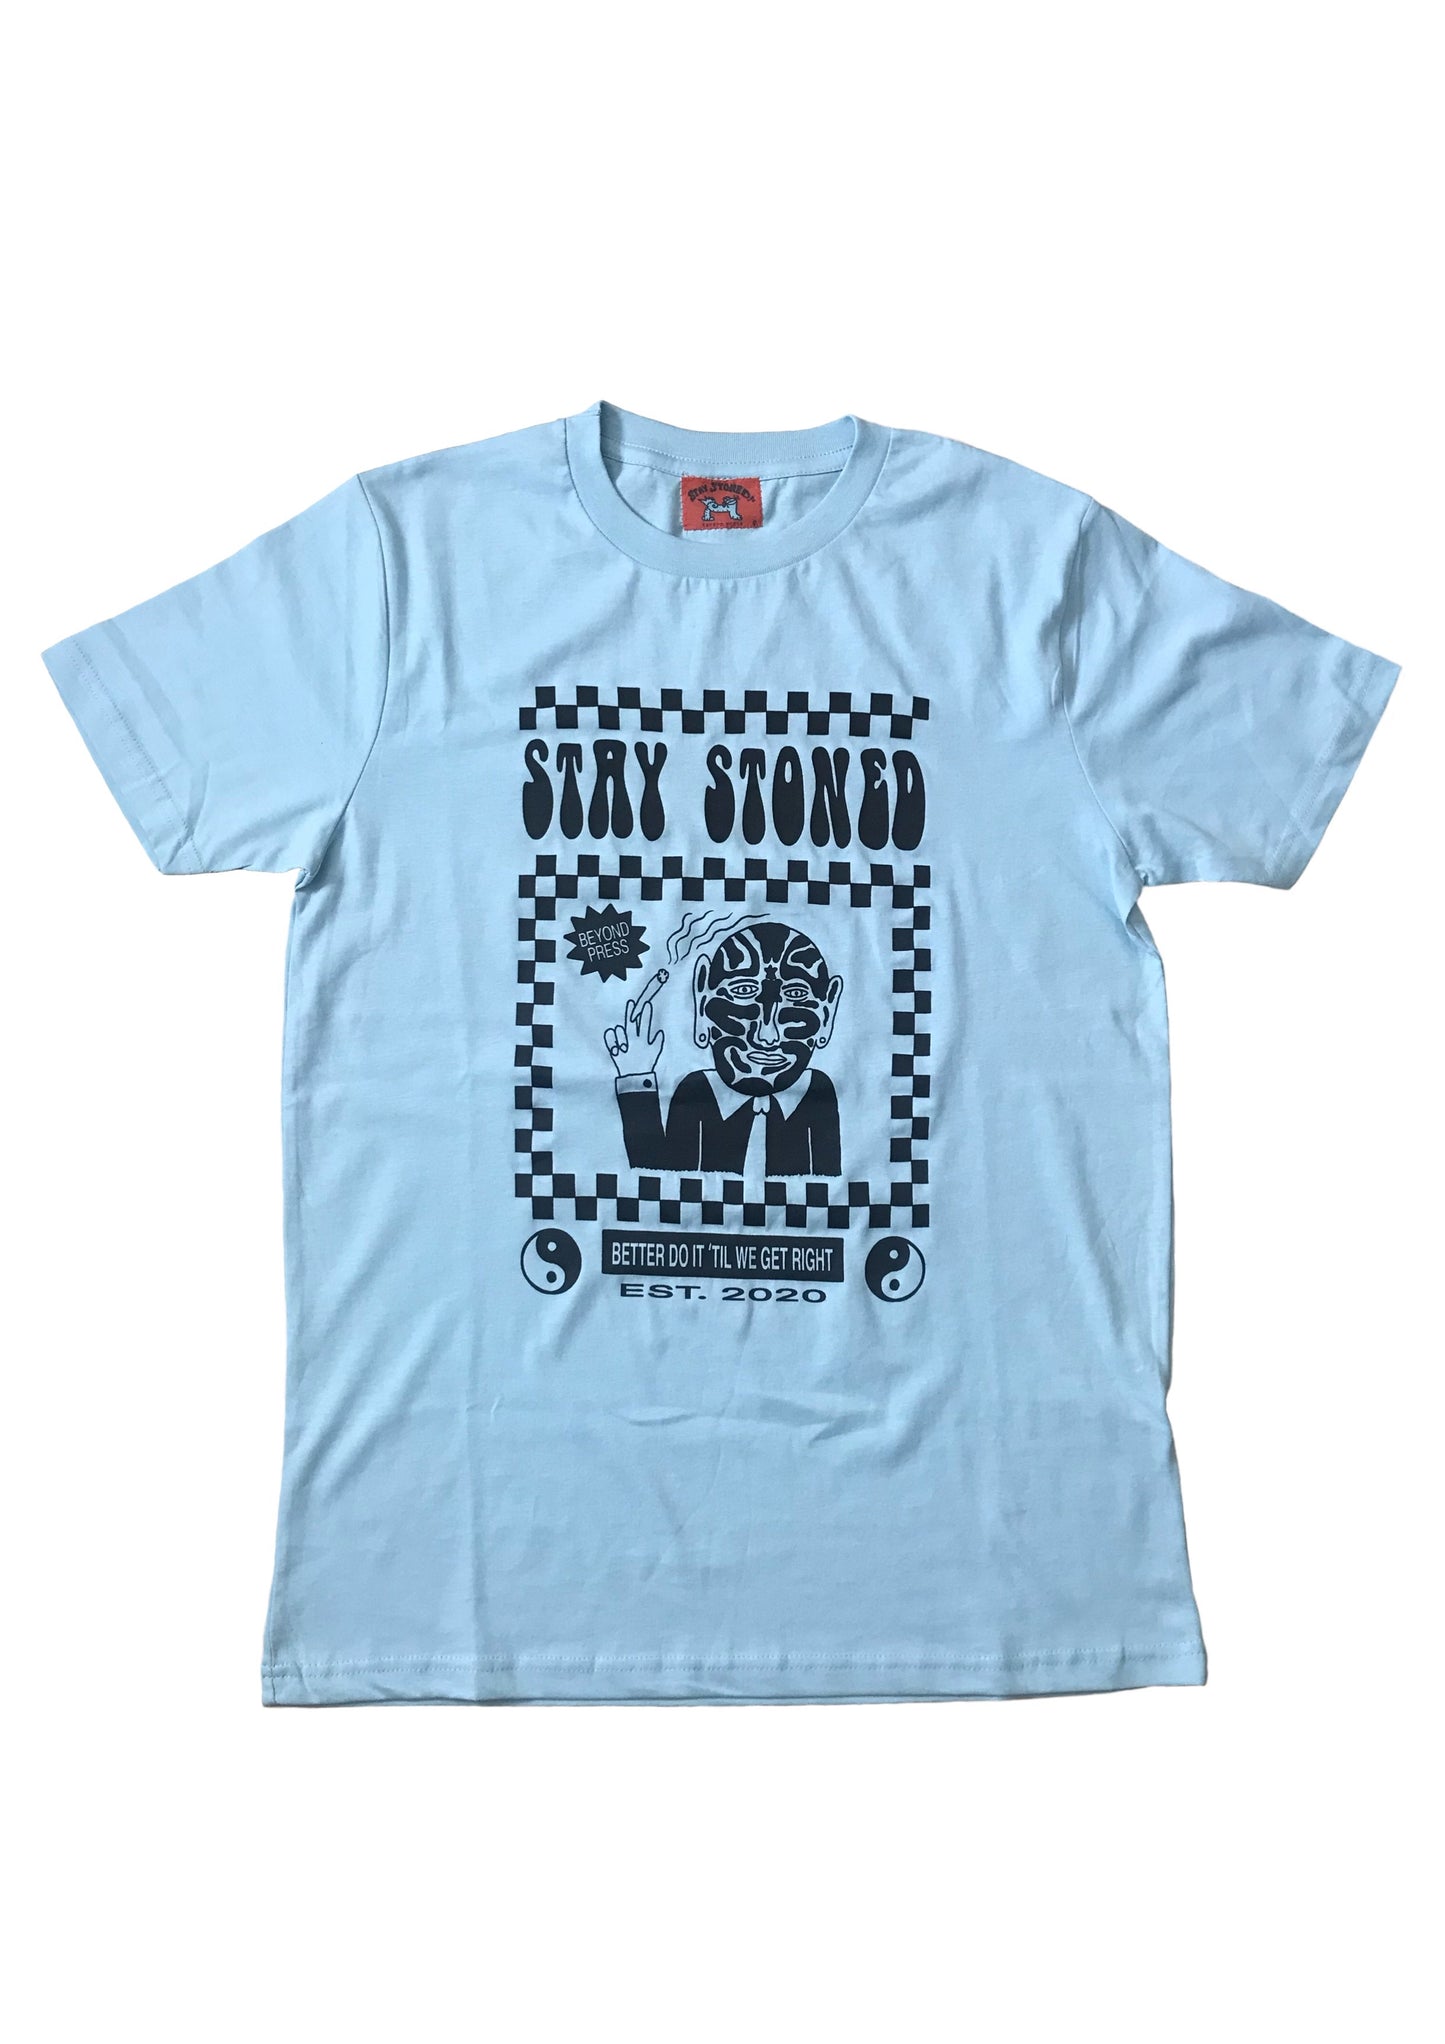 Stay Stoned | The Great Omi | Short Sleeve T-Shirt